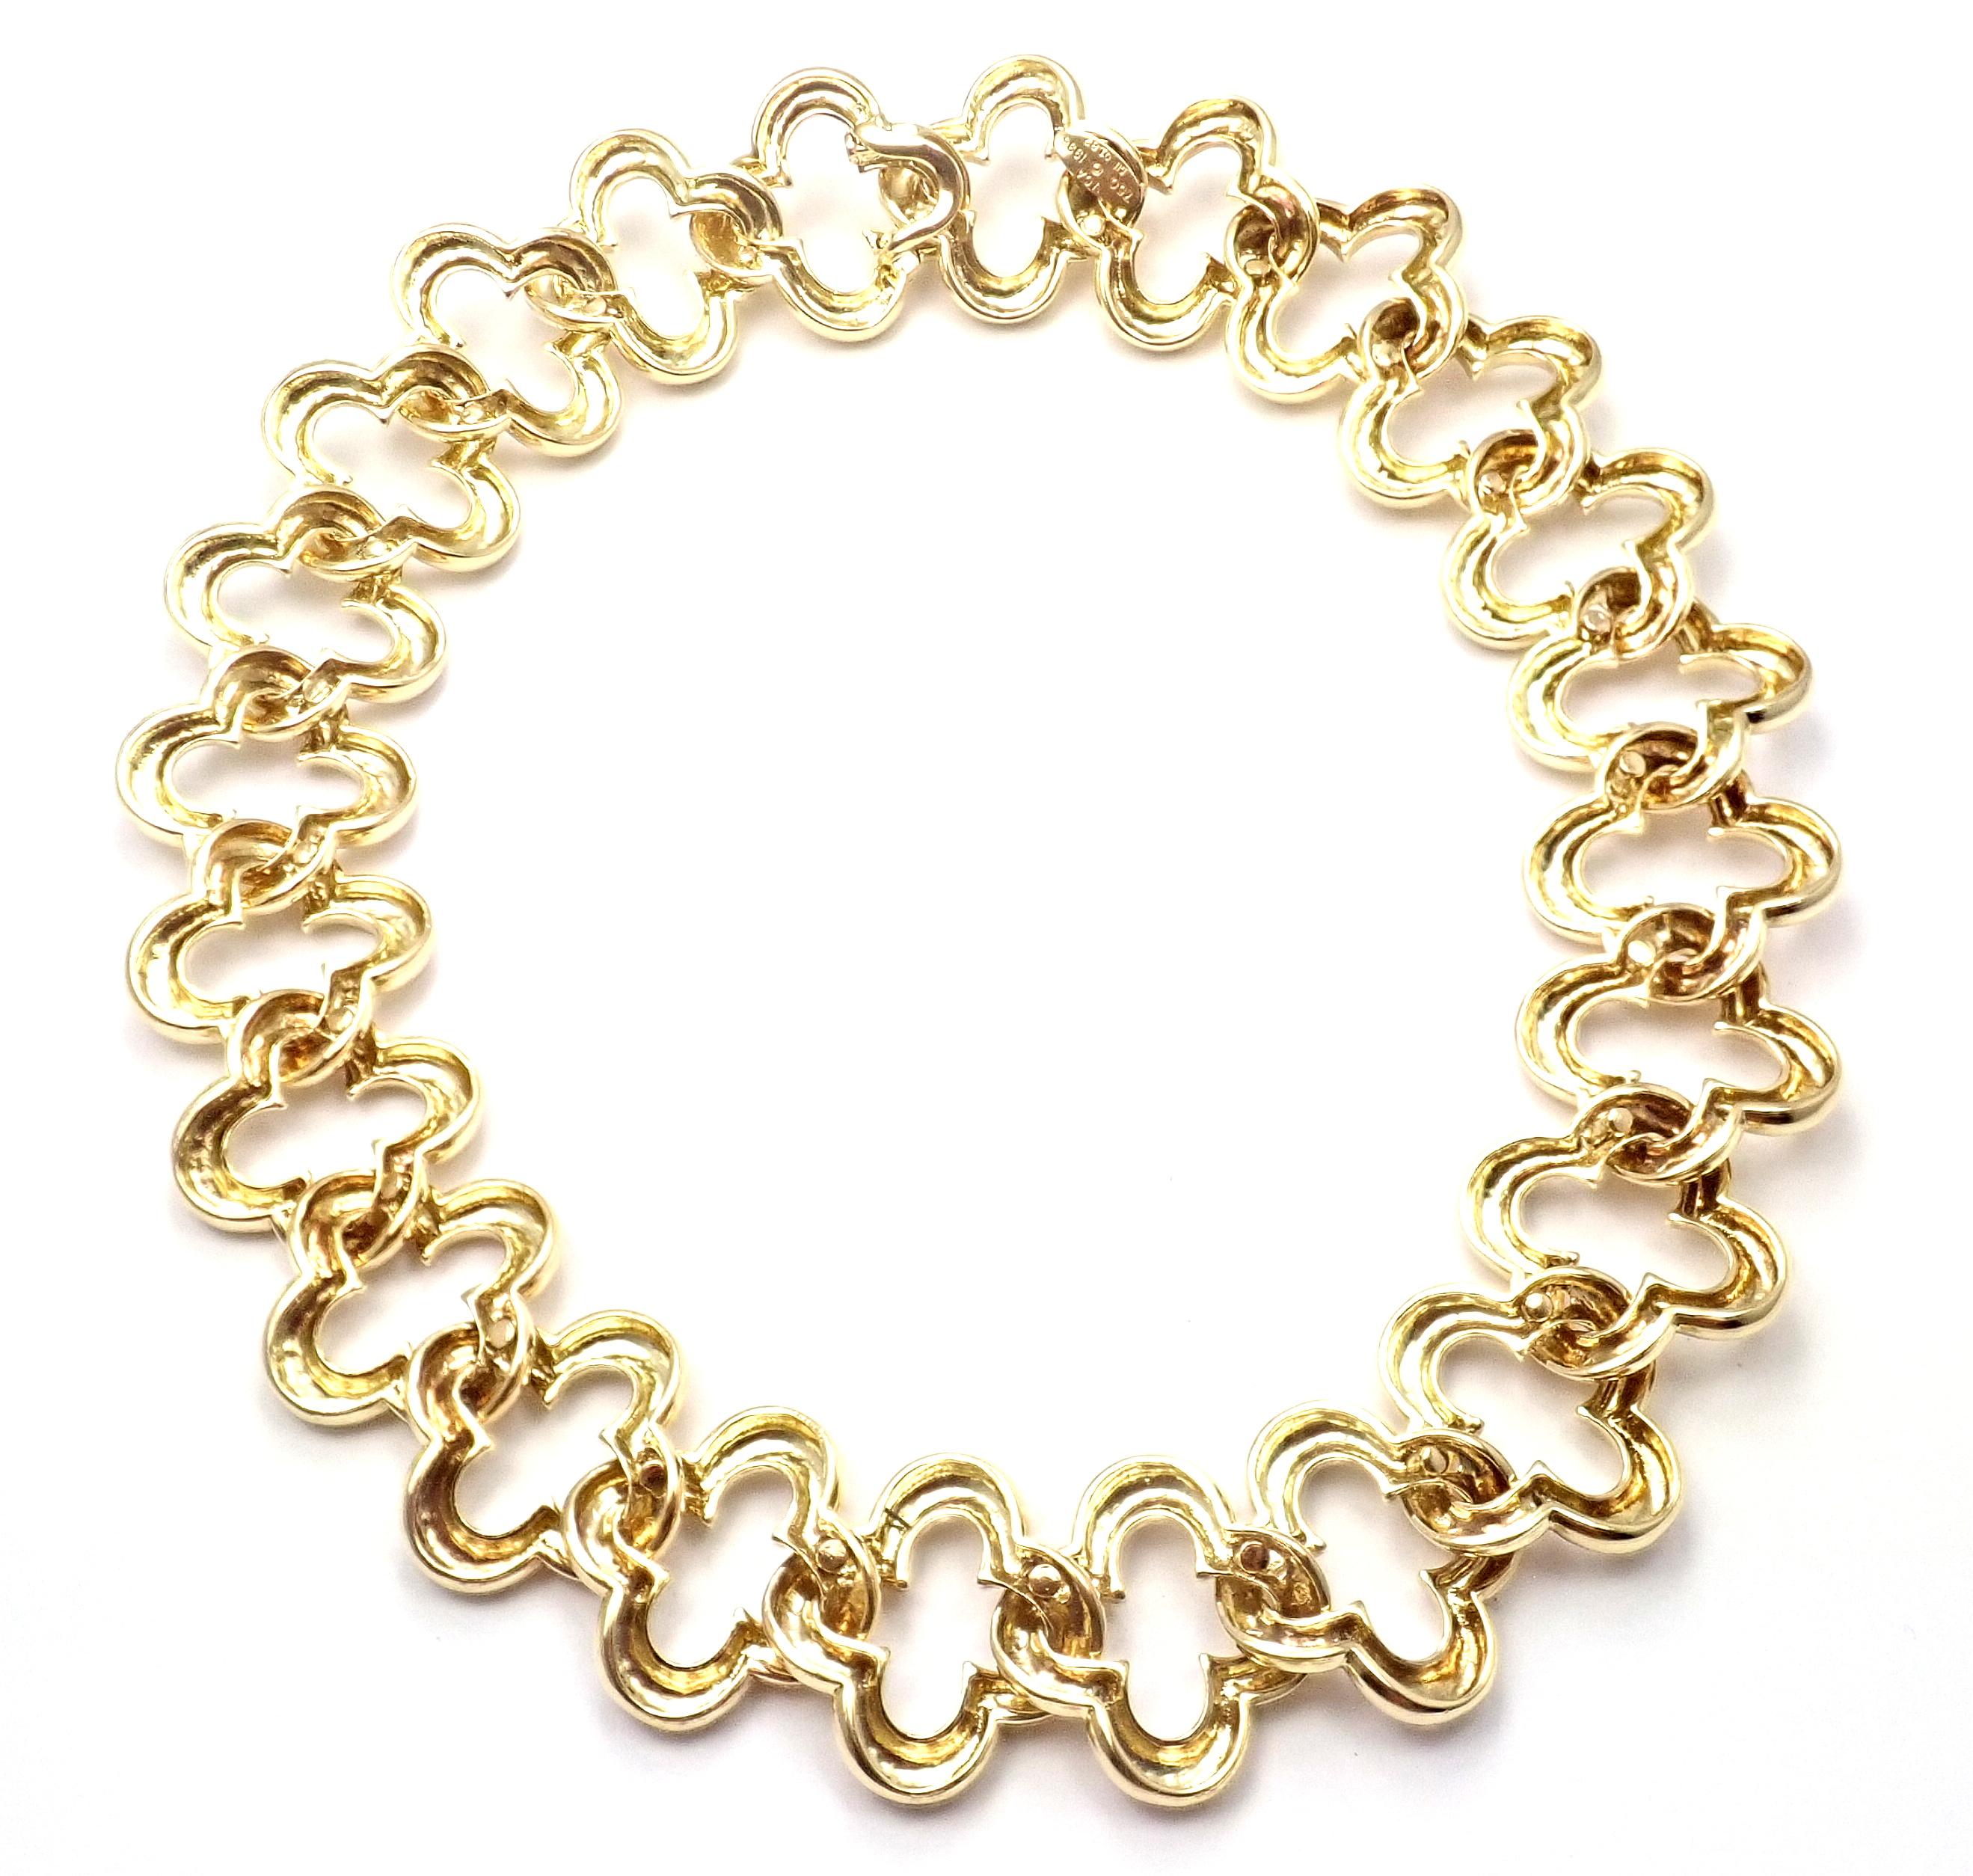 18k Yellow Gold 24 Large Motifs Alhambra Choker Necklace by Van Cleef & Arpels. 
With 24 large motifs of 18k yellow gold Alhambras 1